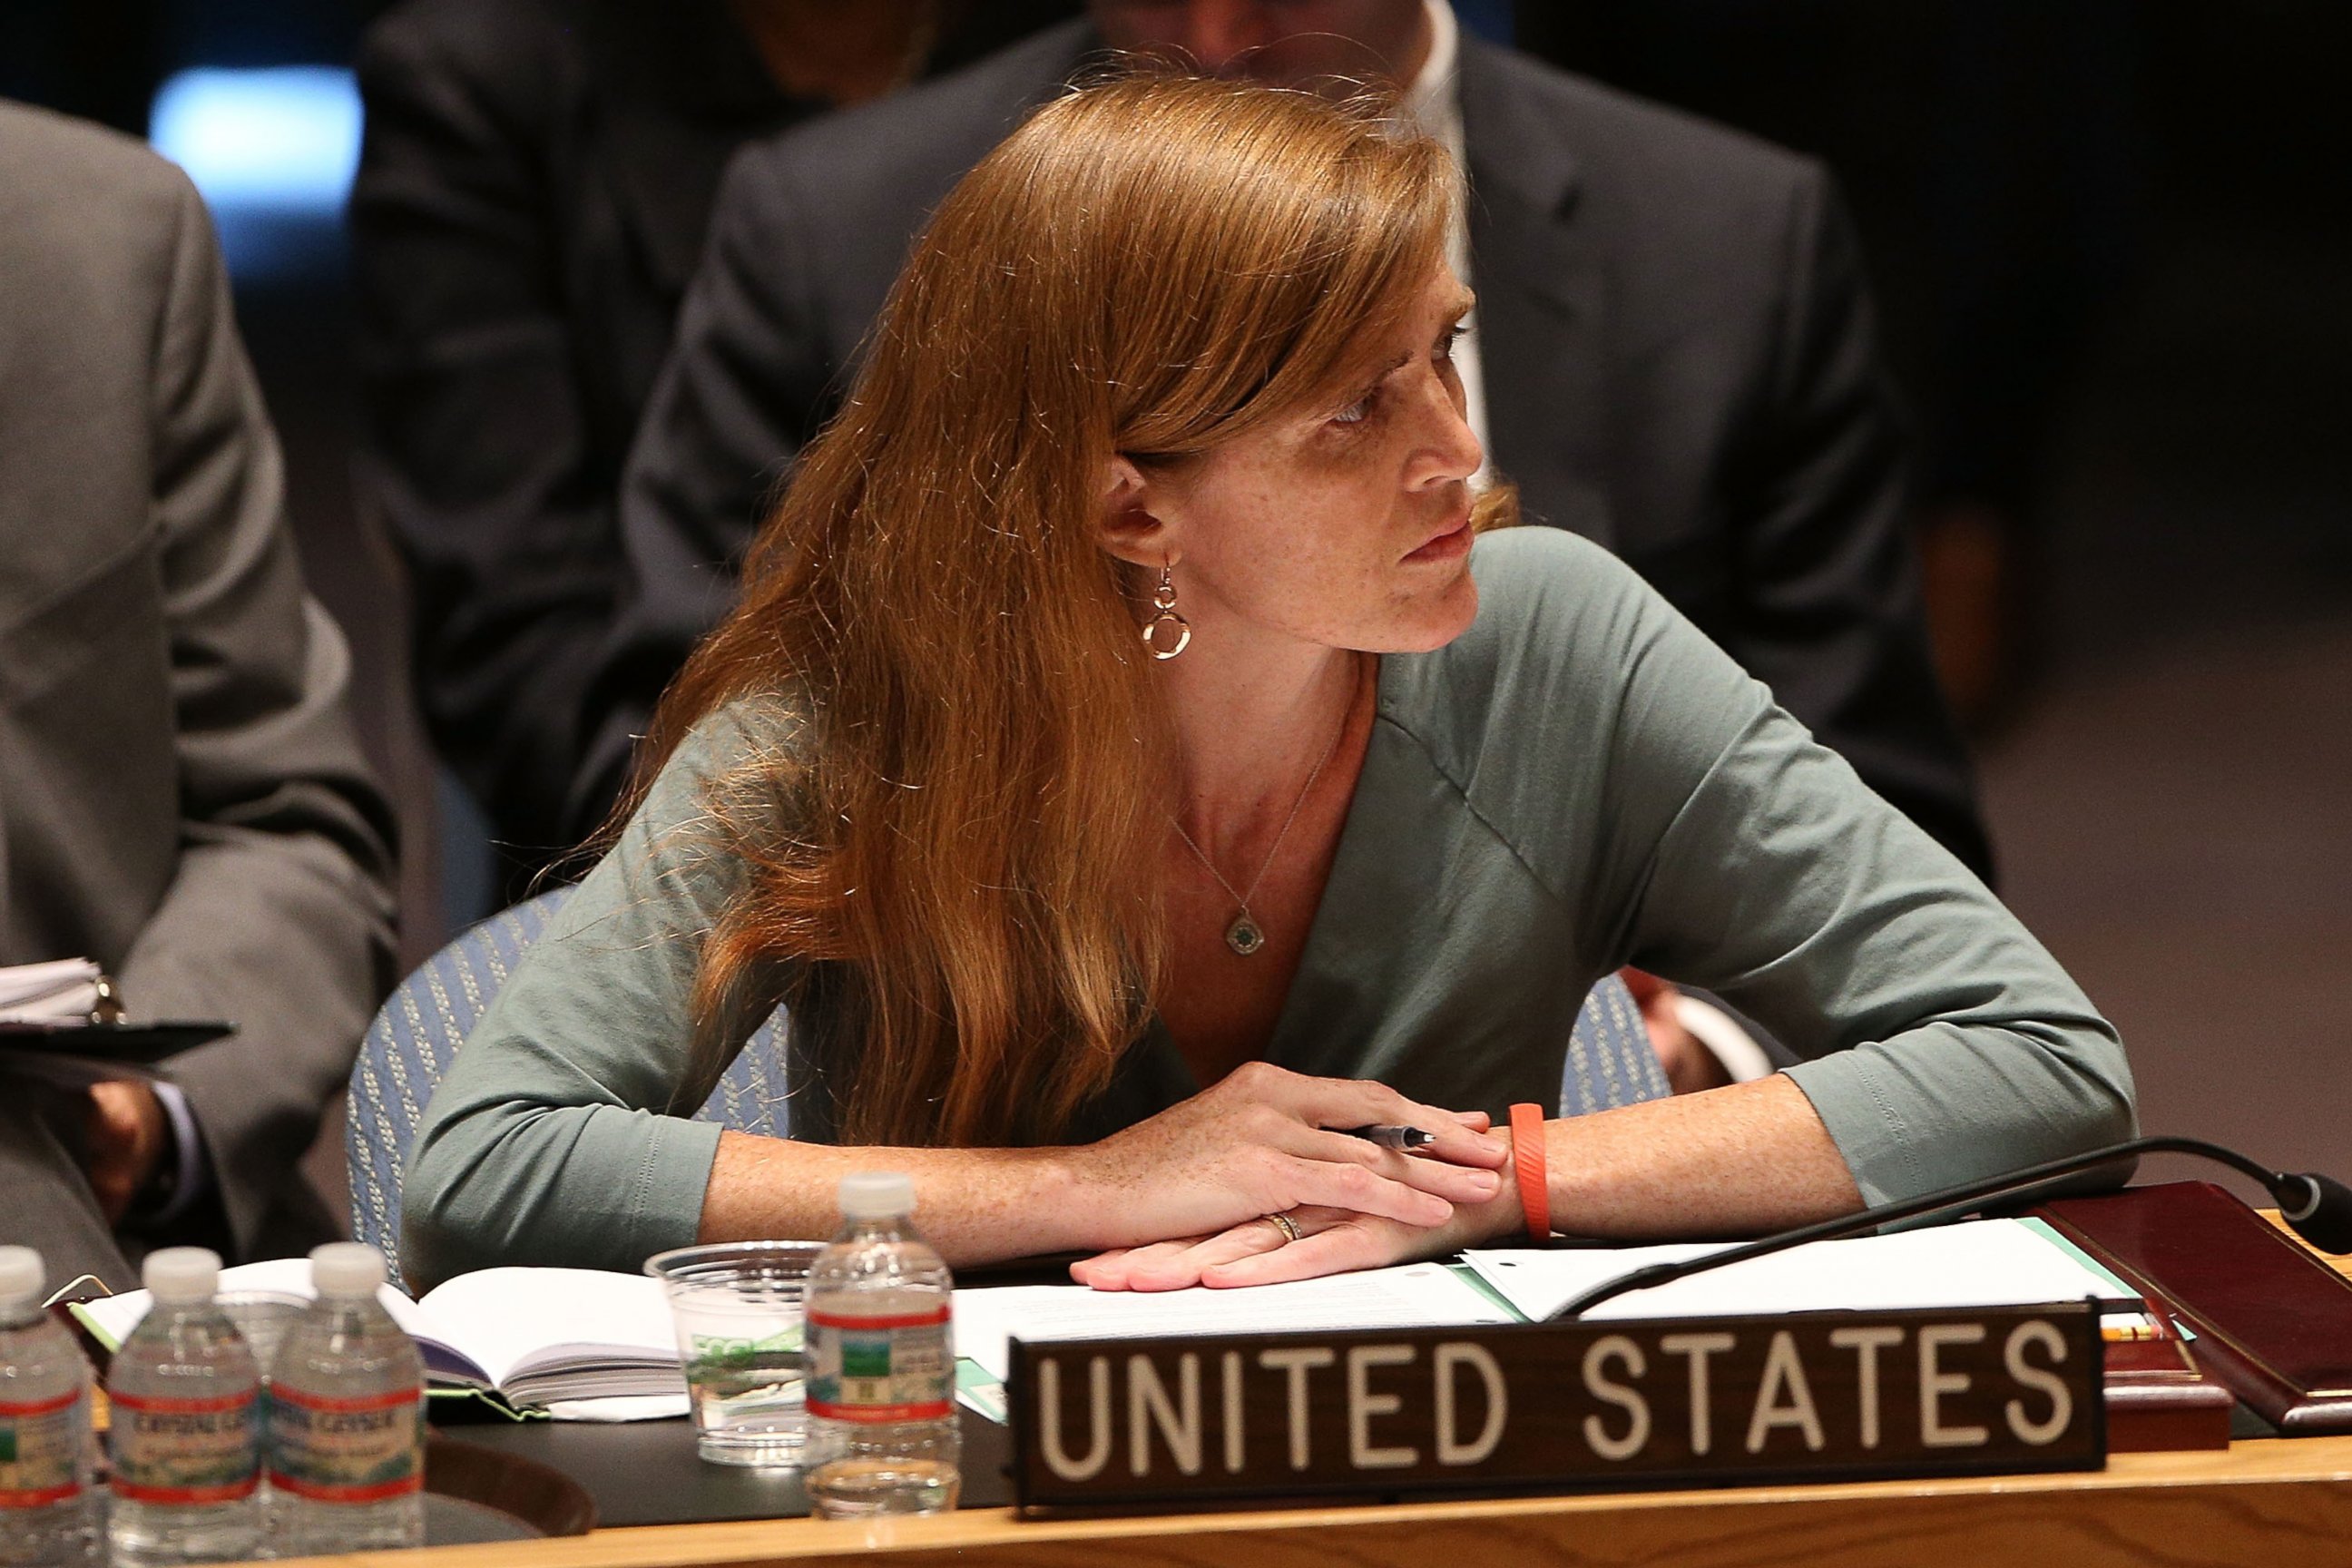 PHOTO: U.S. Ambassador to the United Nations, Samantha Power, attends a meeting of the United Nations Security Council to discuss the shooting down of a Malaysia Airlines passenger jet over eastern Ukraine on July 21, 2014 in New York City.